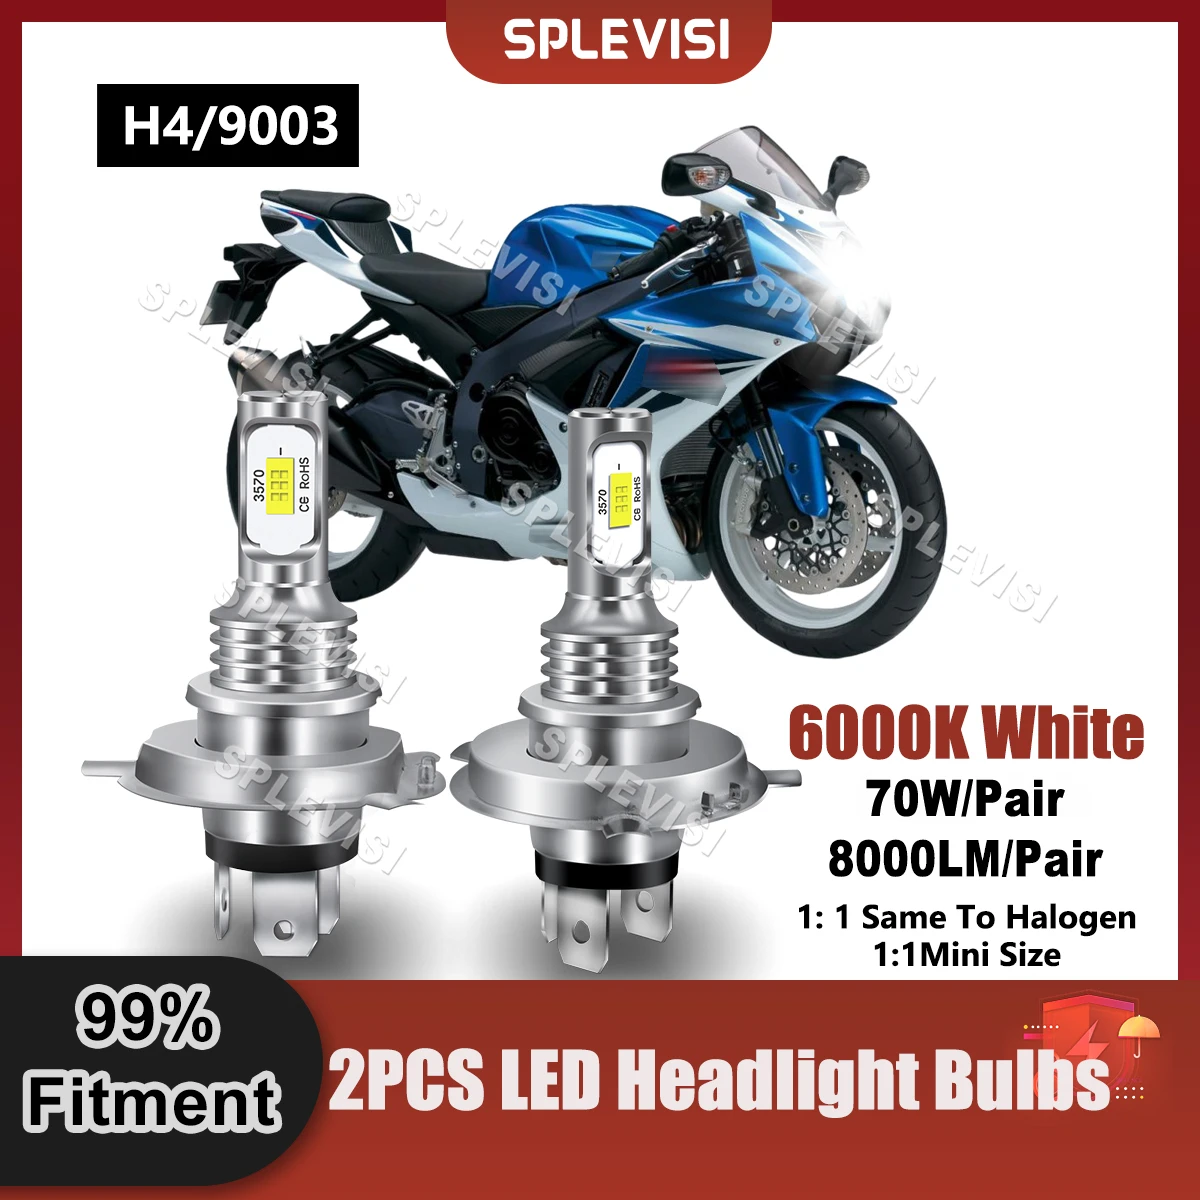 

Replace Bulbs H4/9003 LED Headlight 70W 8000LM/Pair 9V-24V Compatible For Suzuki GSXR1100 1986 1987 1988 1989 1990 1991 1992